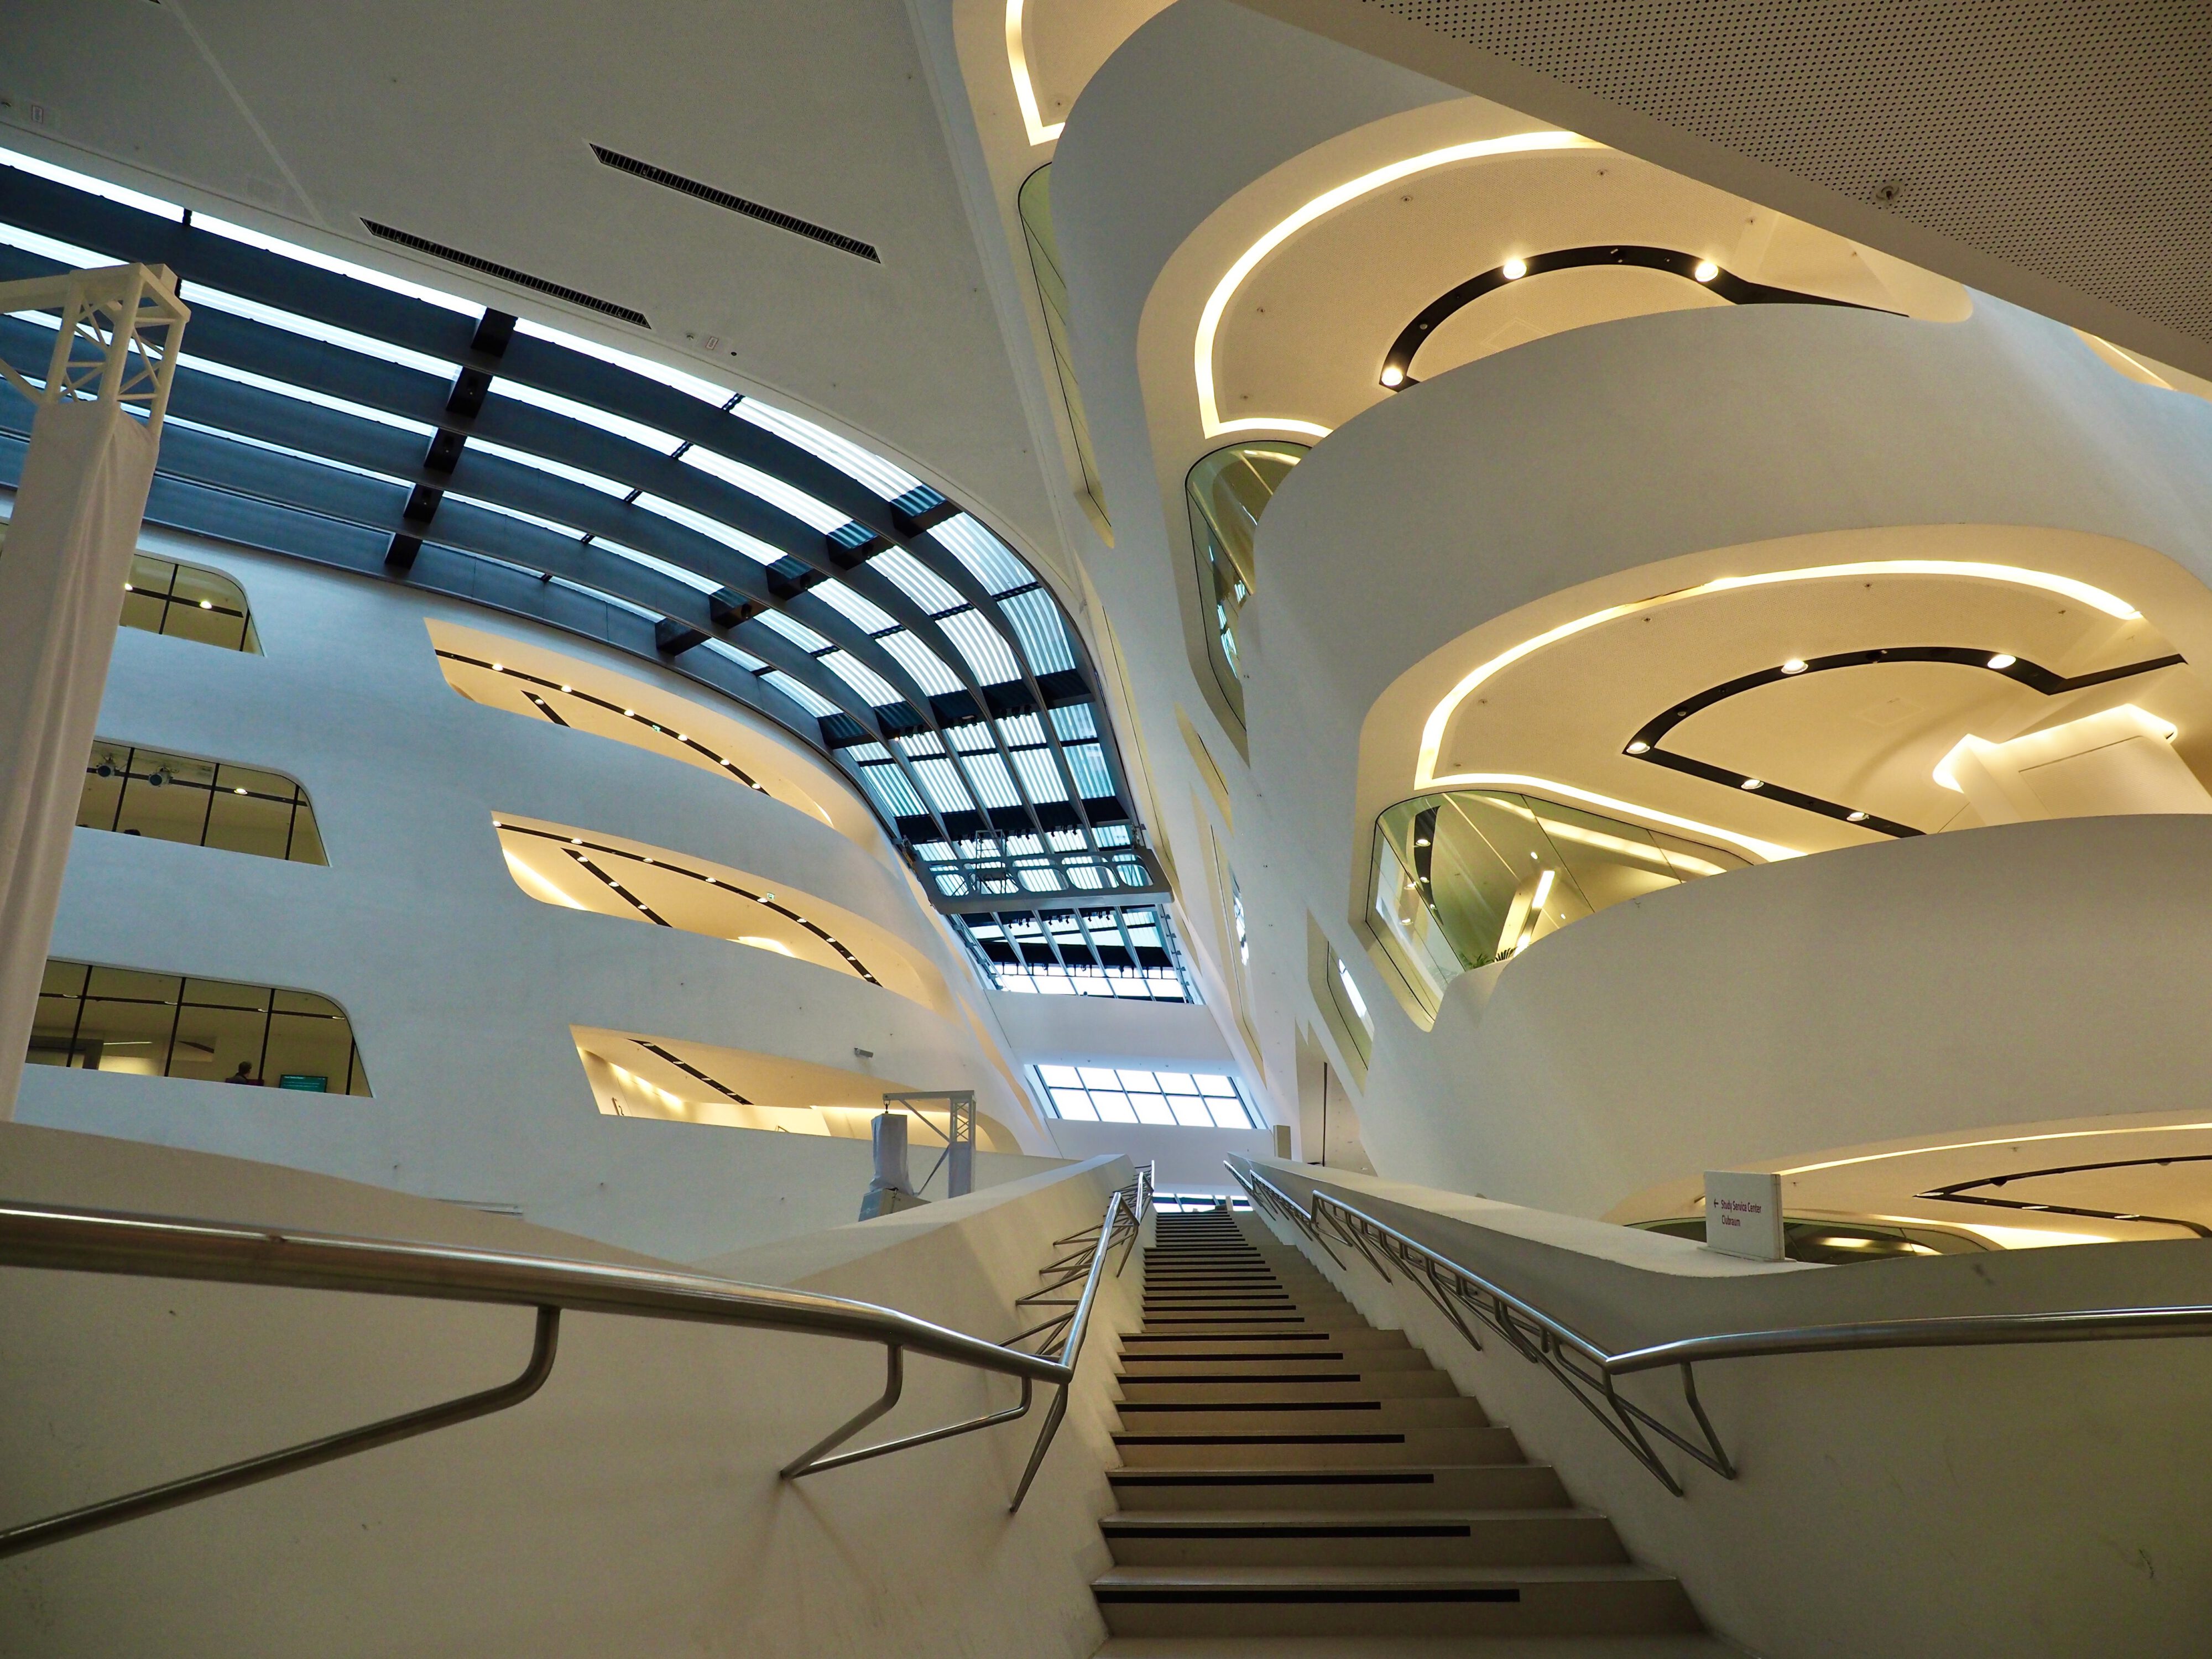 The Library and Learning Centre of the University of Economics Vienna was planned by Zaha Hadid and opened in 2013